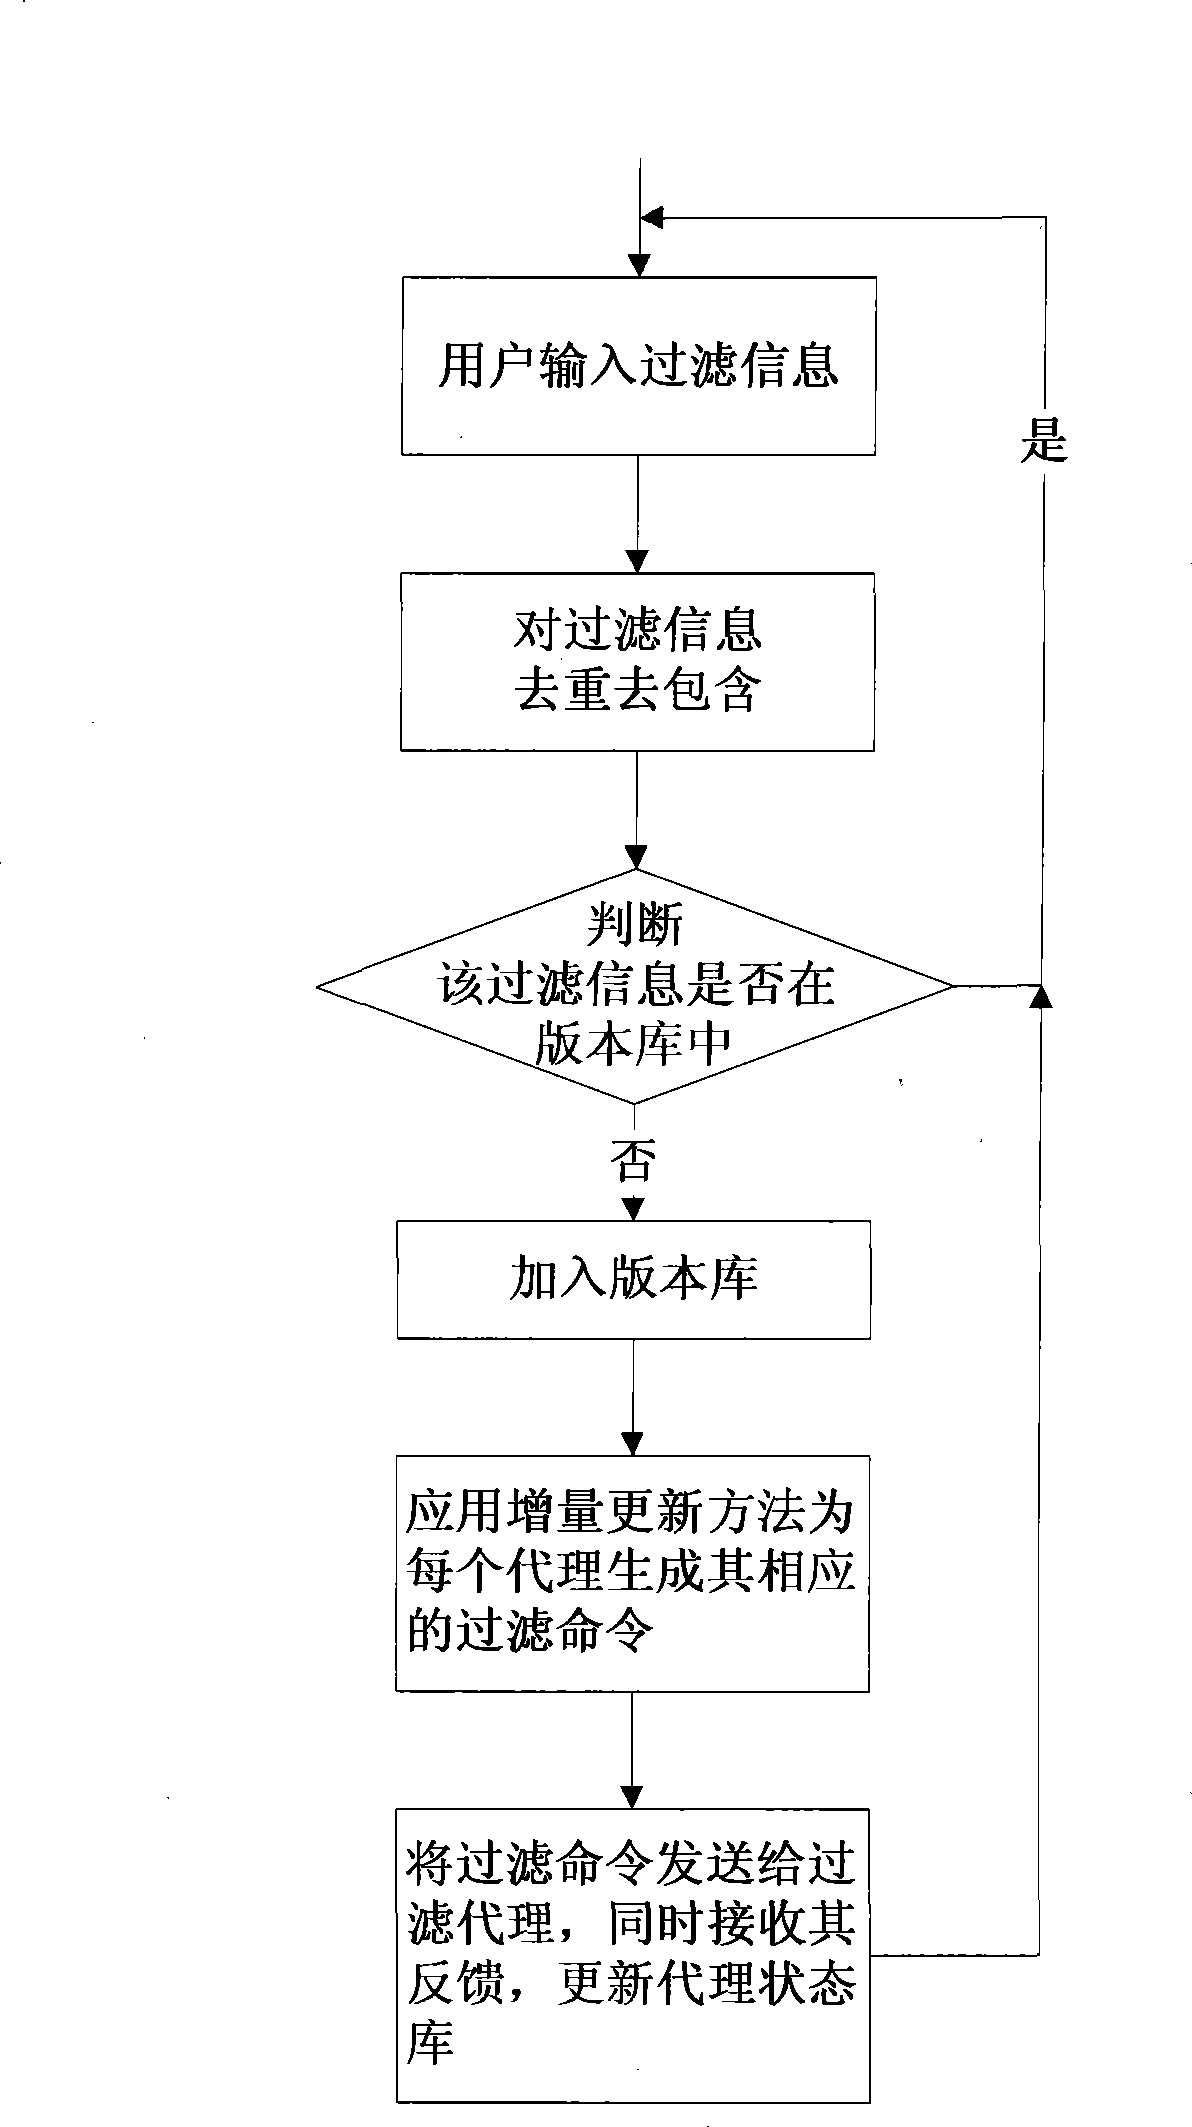 Domain name filtering system and method